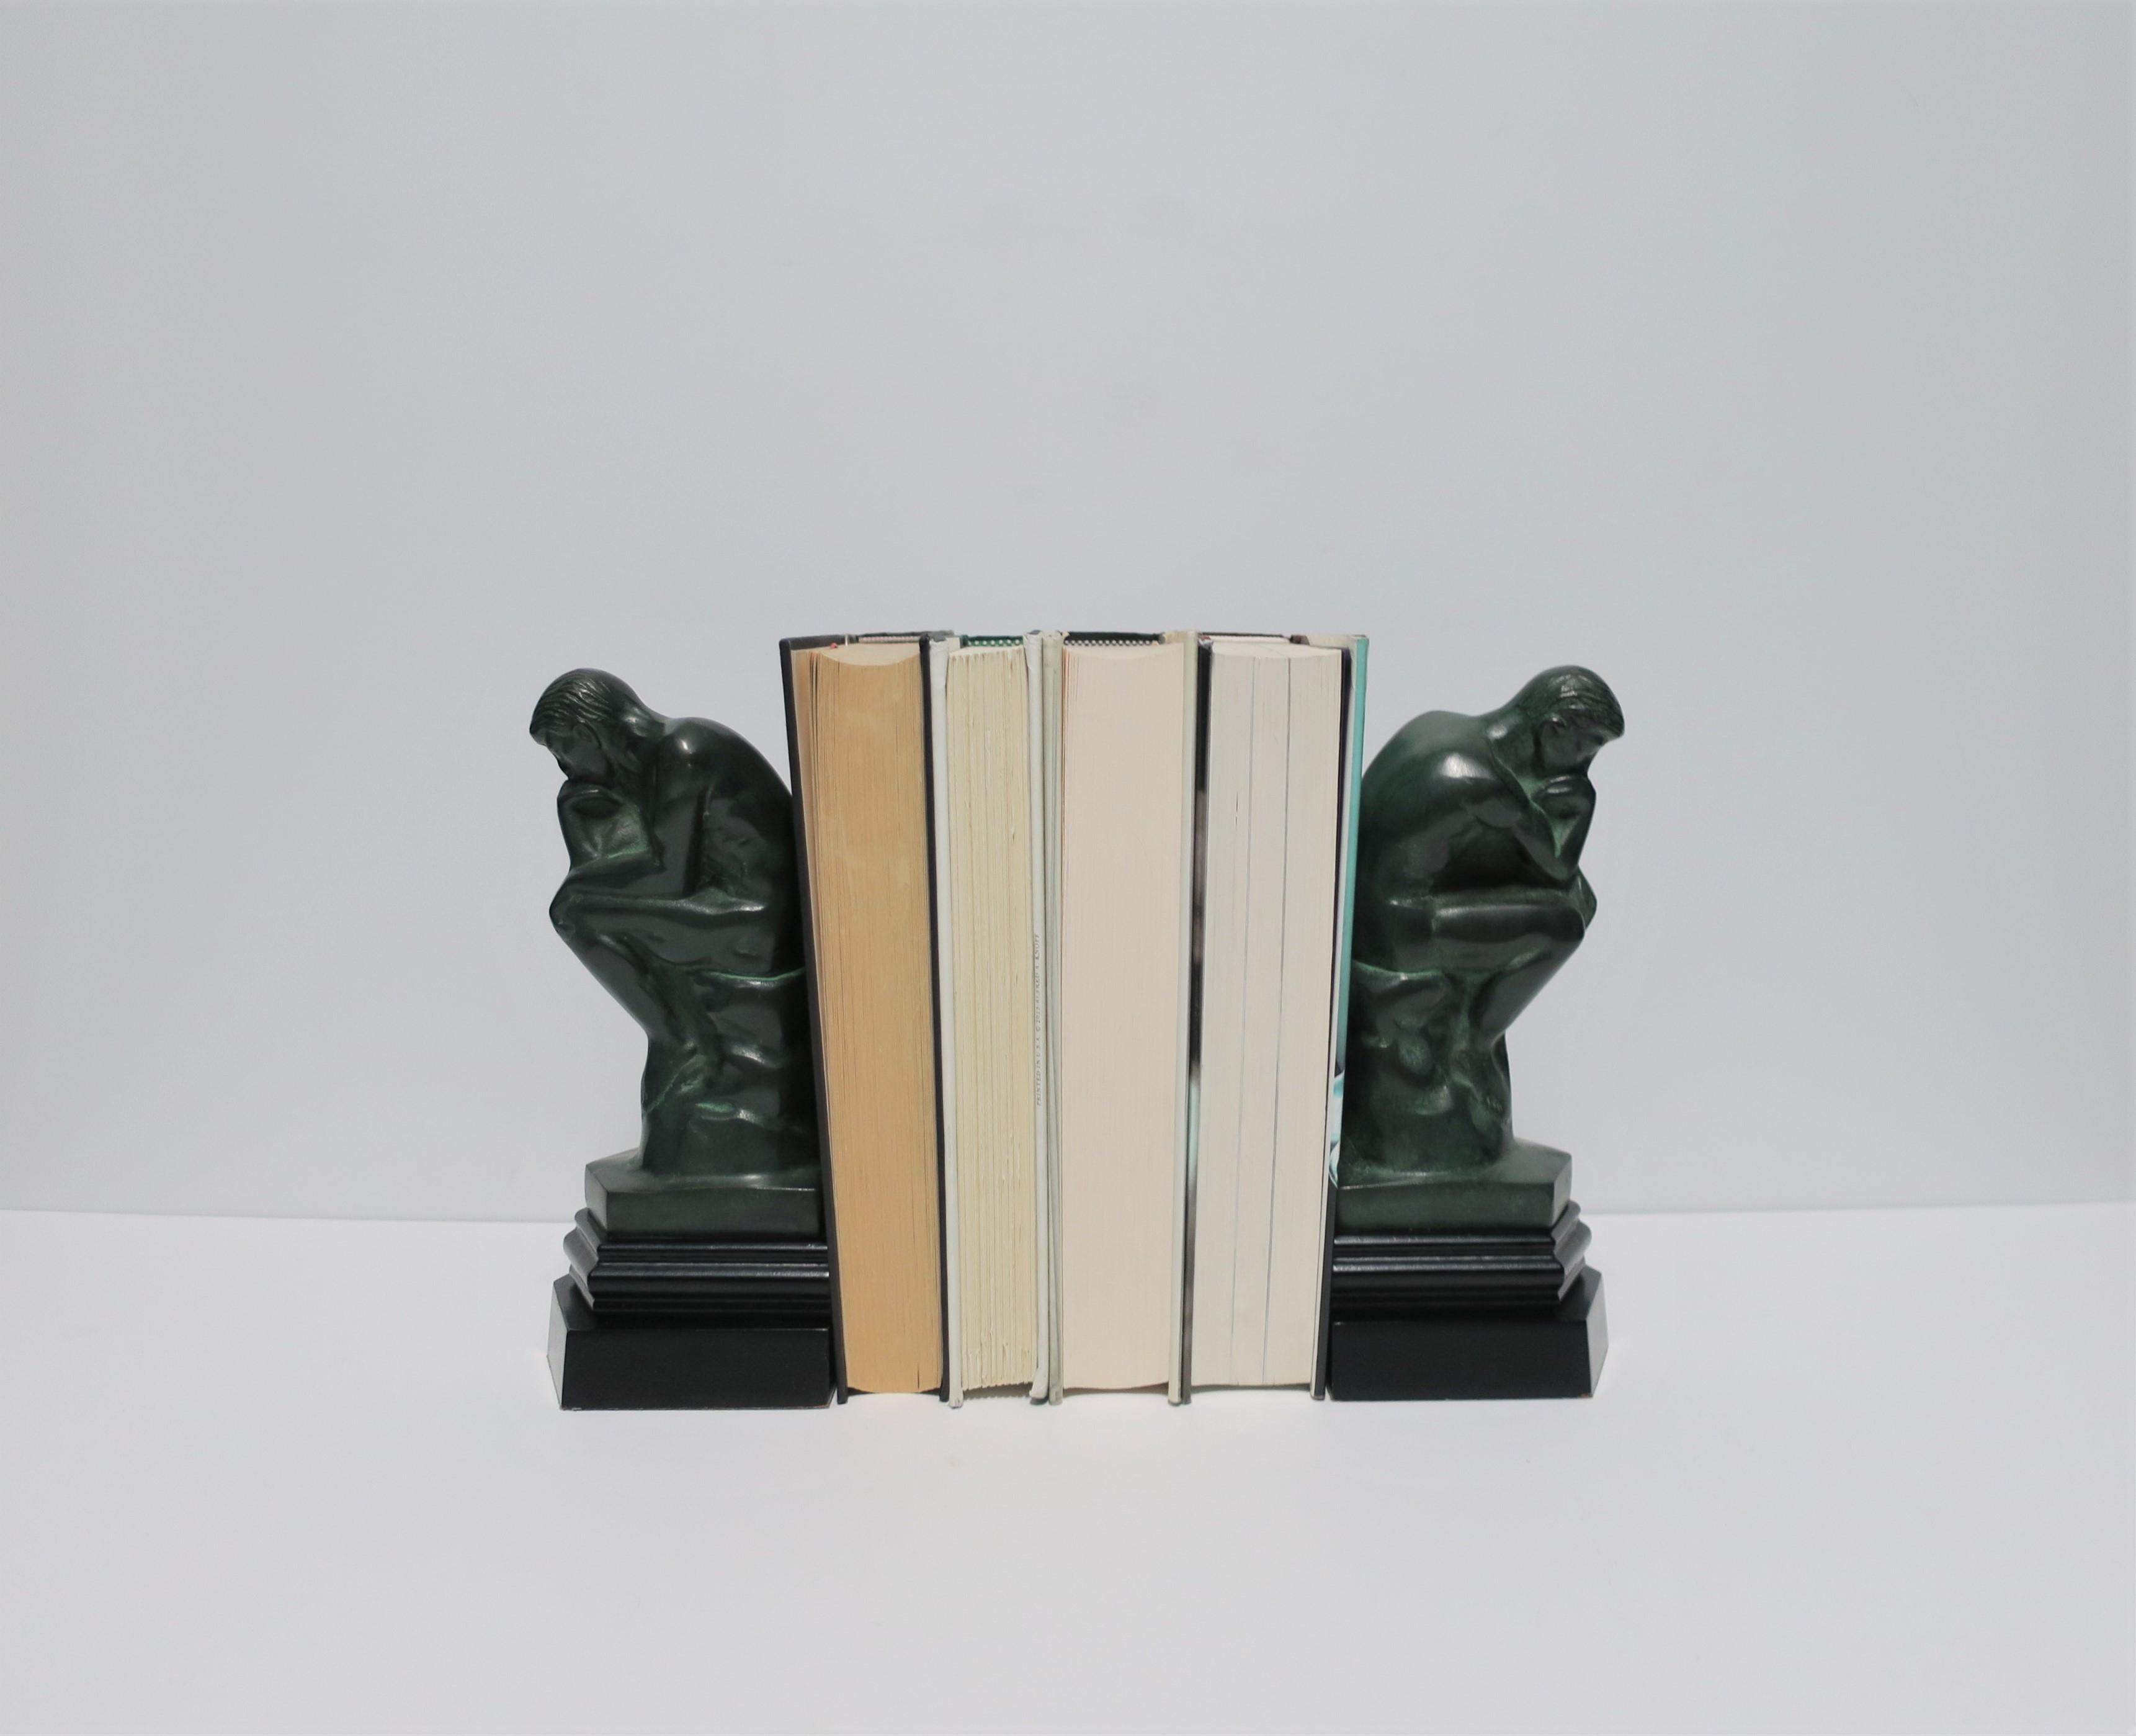 Black and Green Male Sculpture Bookends, Pair 1